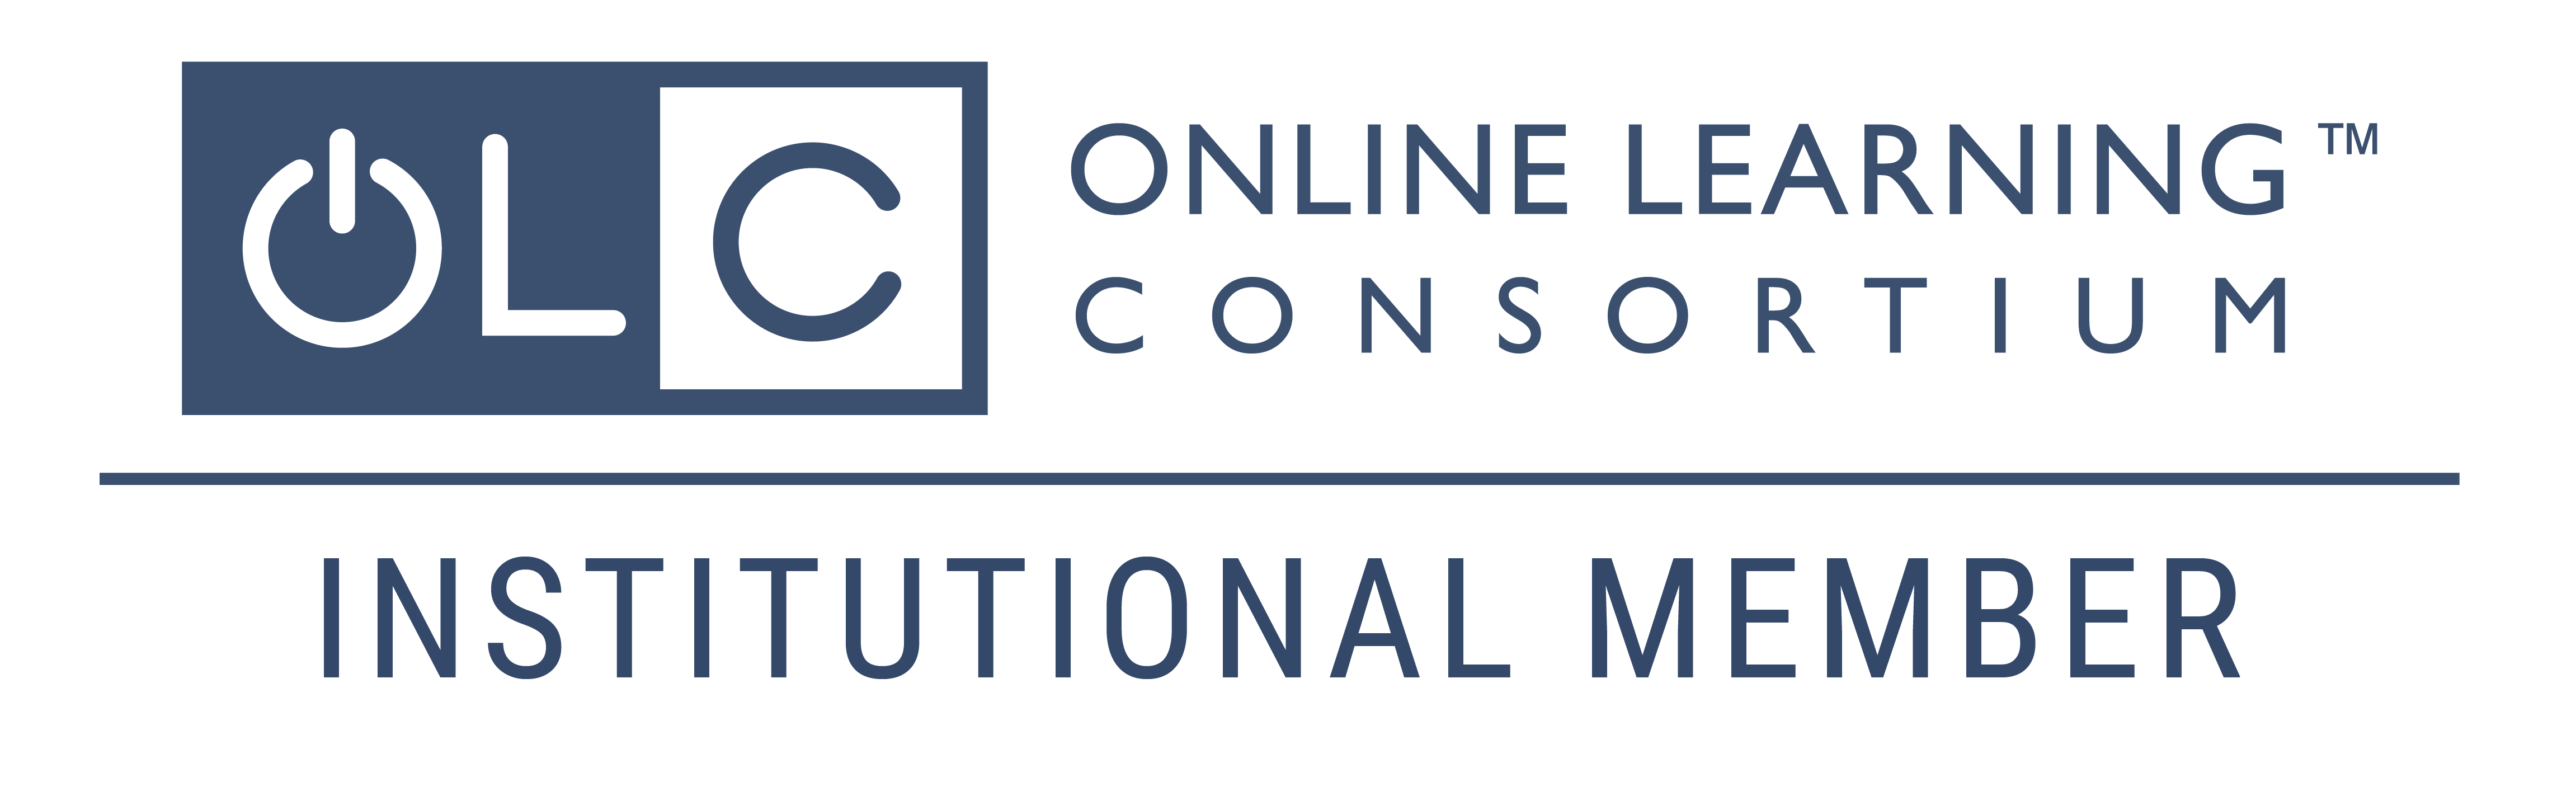 Online Learning Consortium (OLC) official logo for institutional members